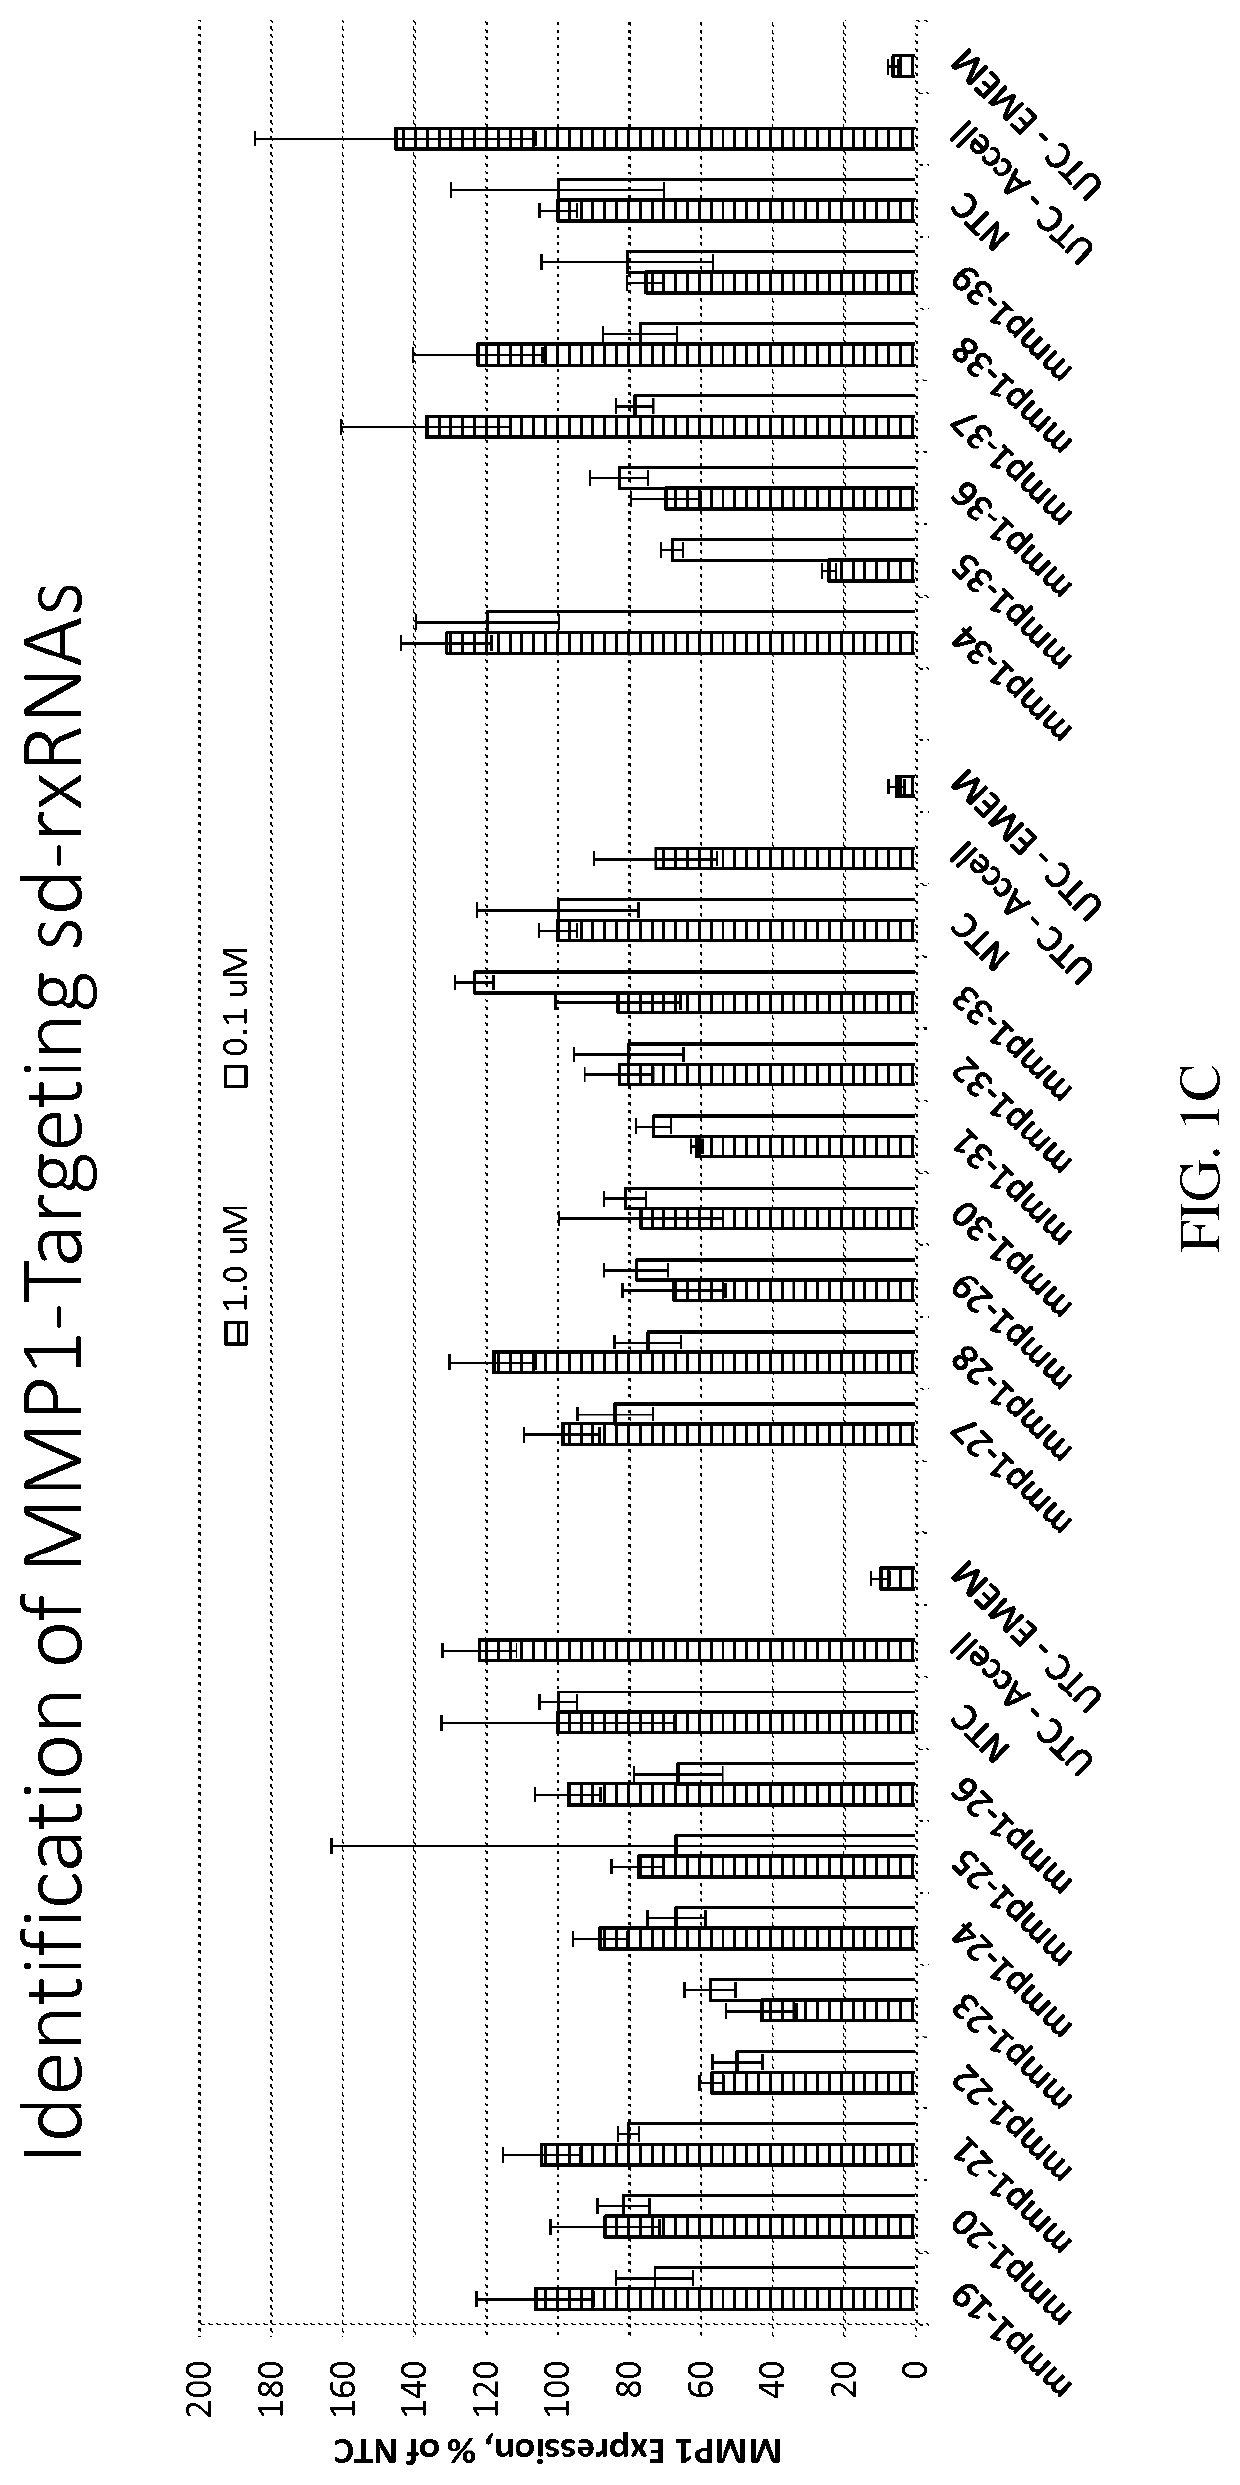 Methods for treating aging and skin disorders using nucleic acids targeting Tyr or MMP1